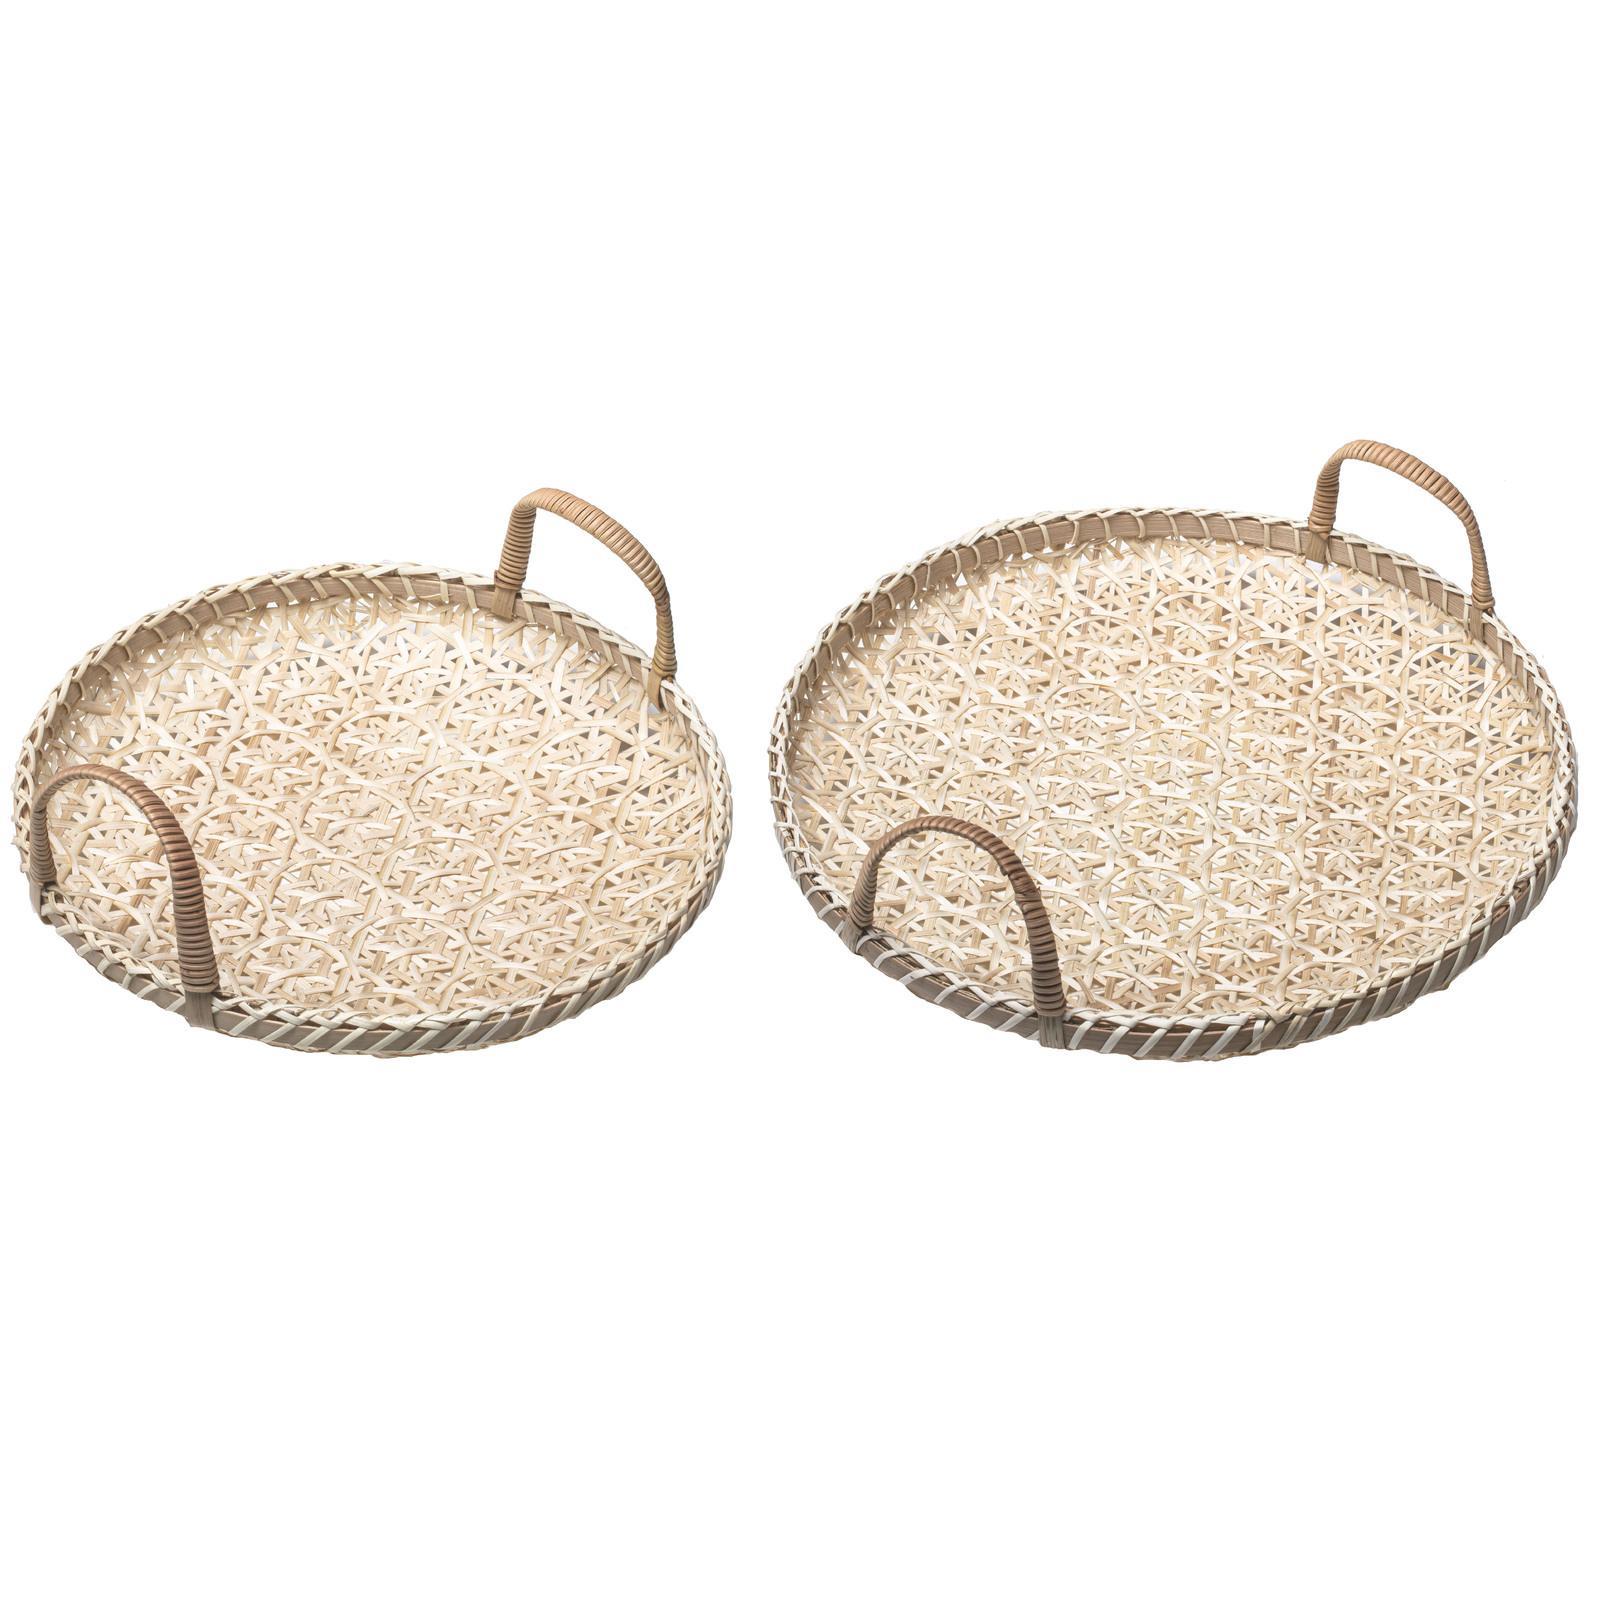 2pc Ladelle Bamboo Woven Round Natural Serving Tray 36x12cm/30x10cm Set